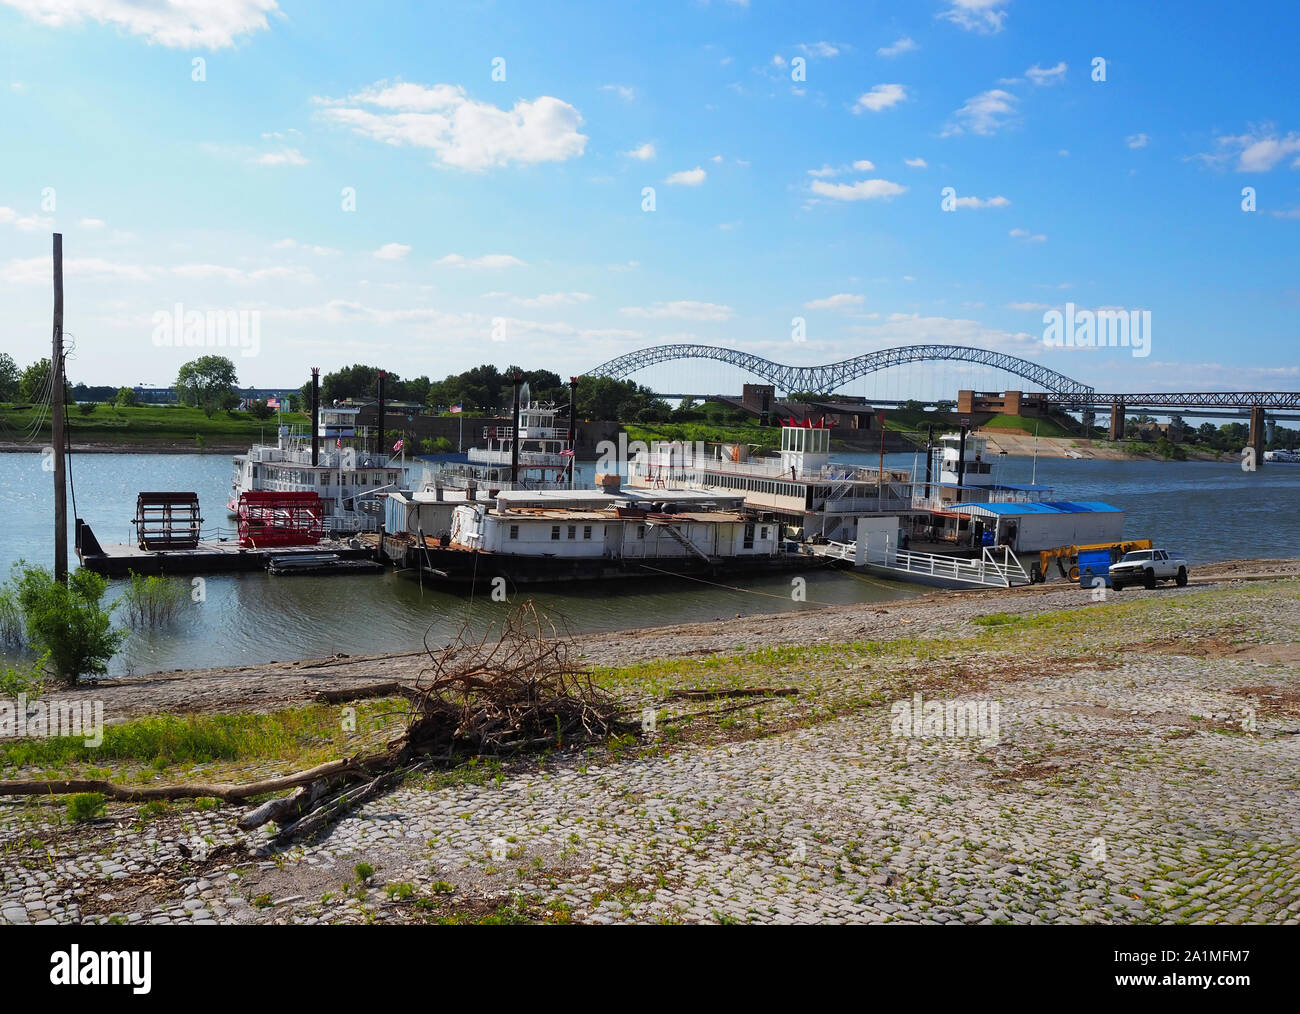 Old riversboats and and some removed paddlewheels next to the shore of the Mississippi river with the Hernando de Soto Bridge in Memphis, TN n the bac Stock Photo